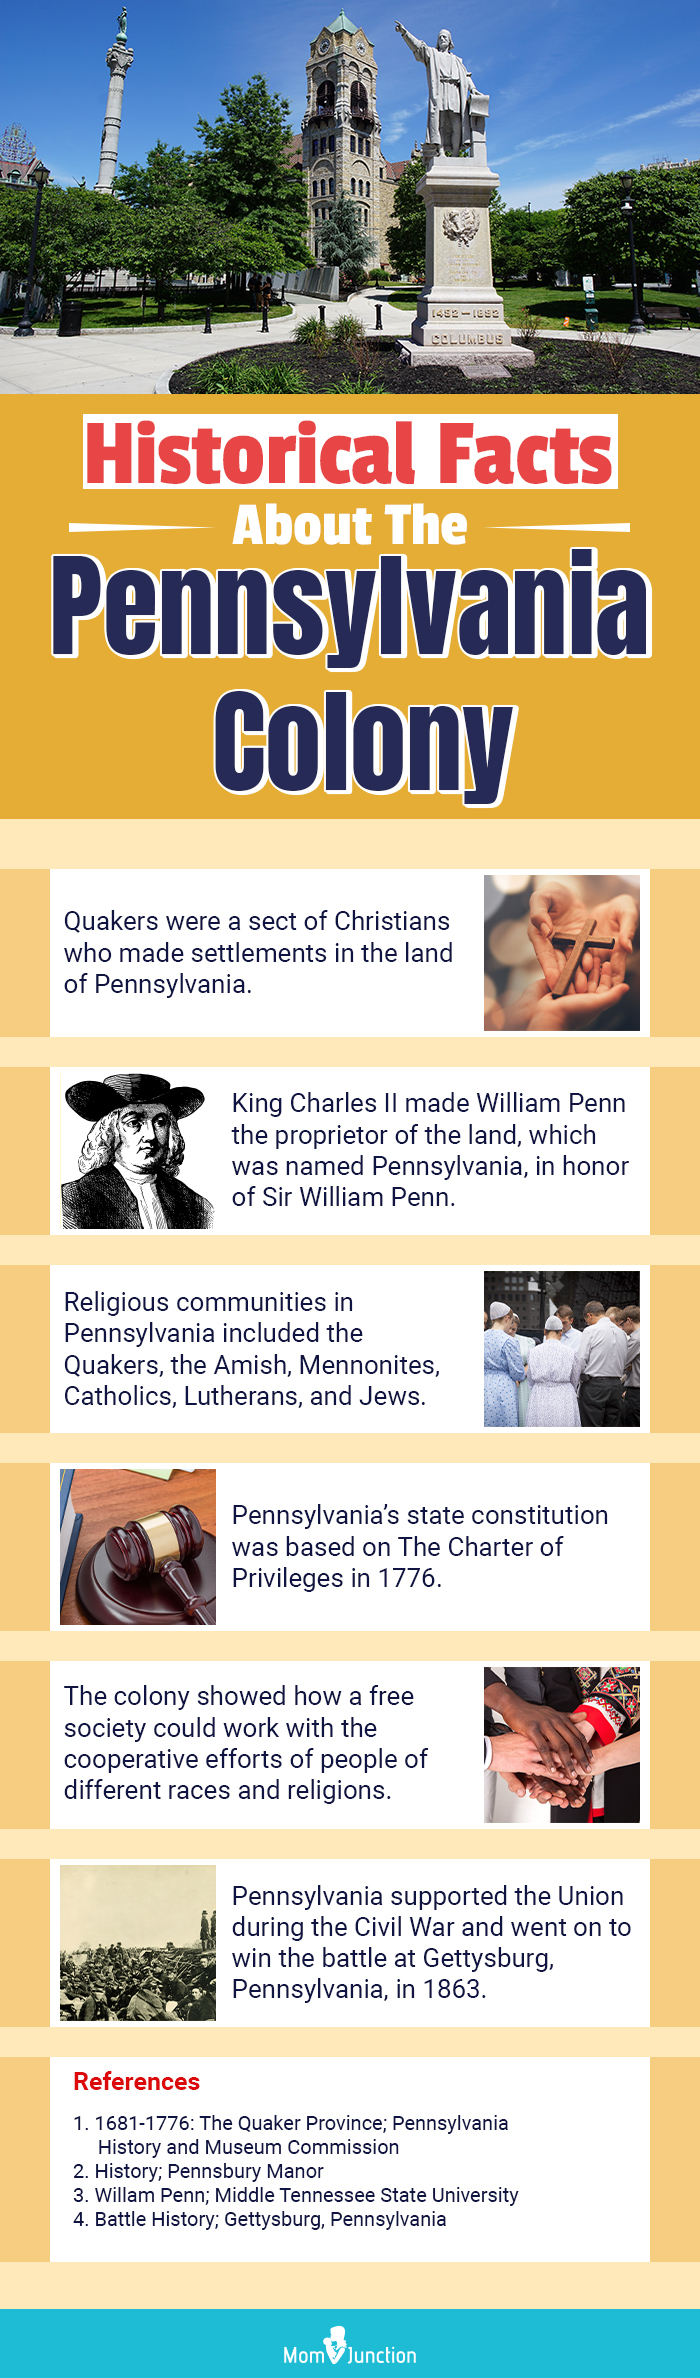 historical facts about the pennsylvania colony for children (infographic) 